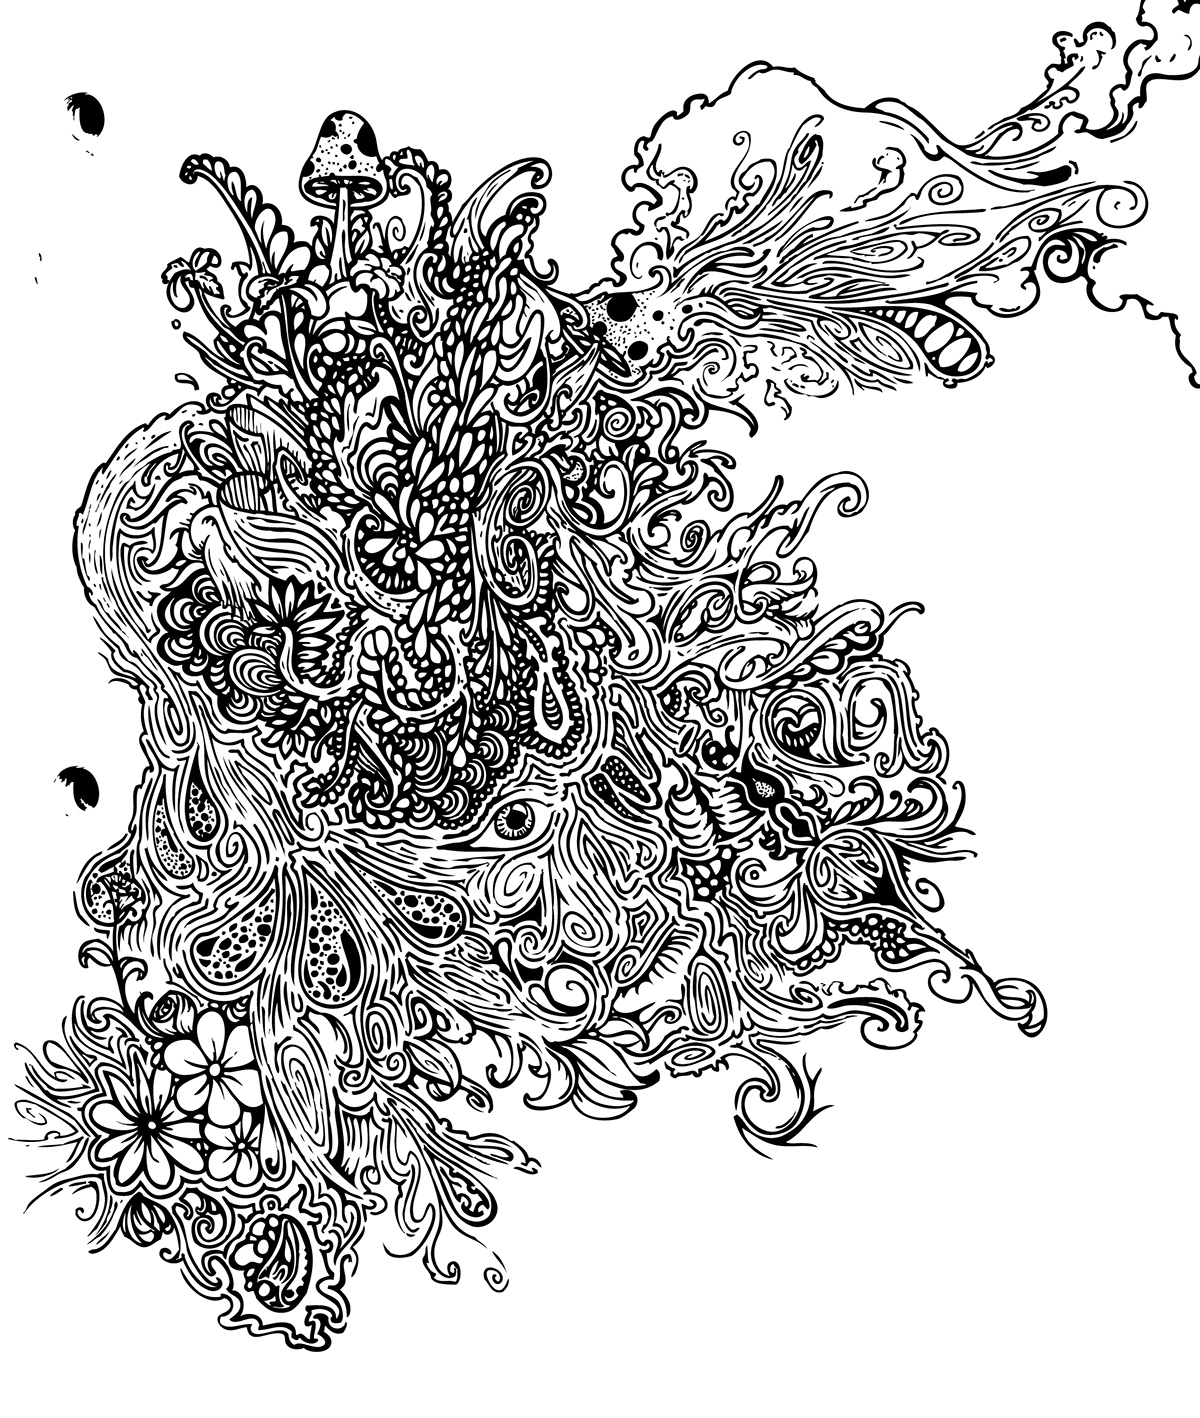 intricate  detail  ink  trippy black and white